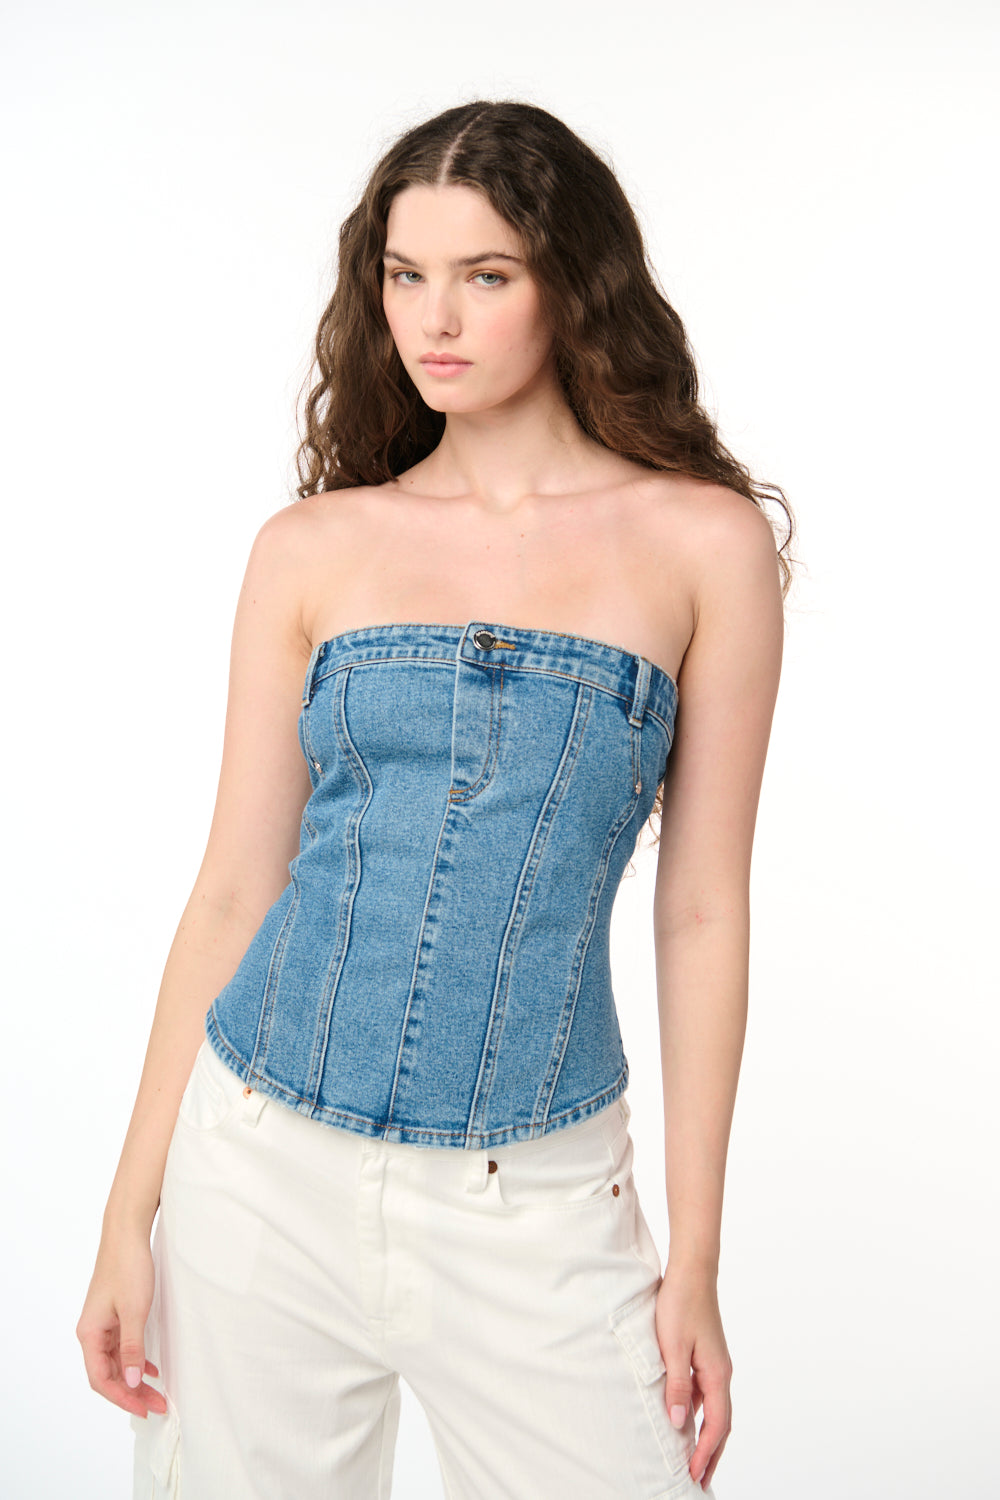 Baby Blue Reworked Spellout Corset Top Size undefined - $67 - From Allison